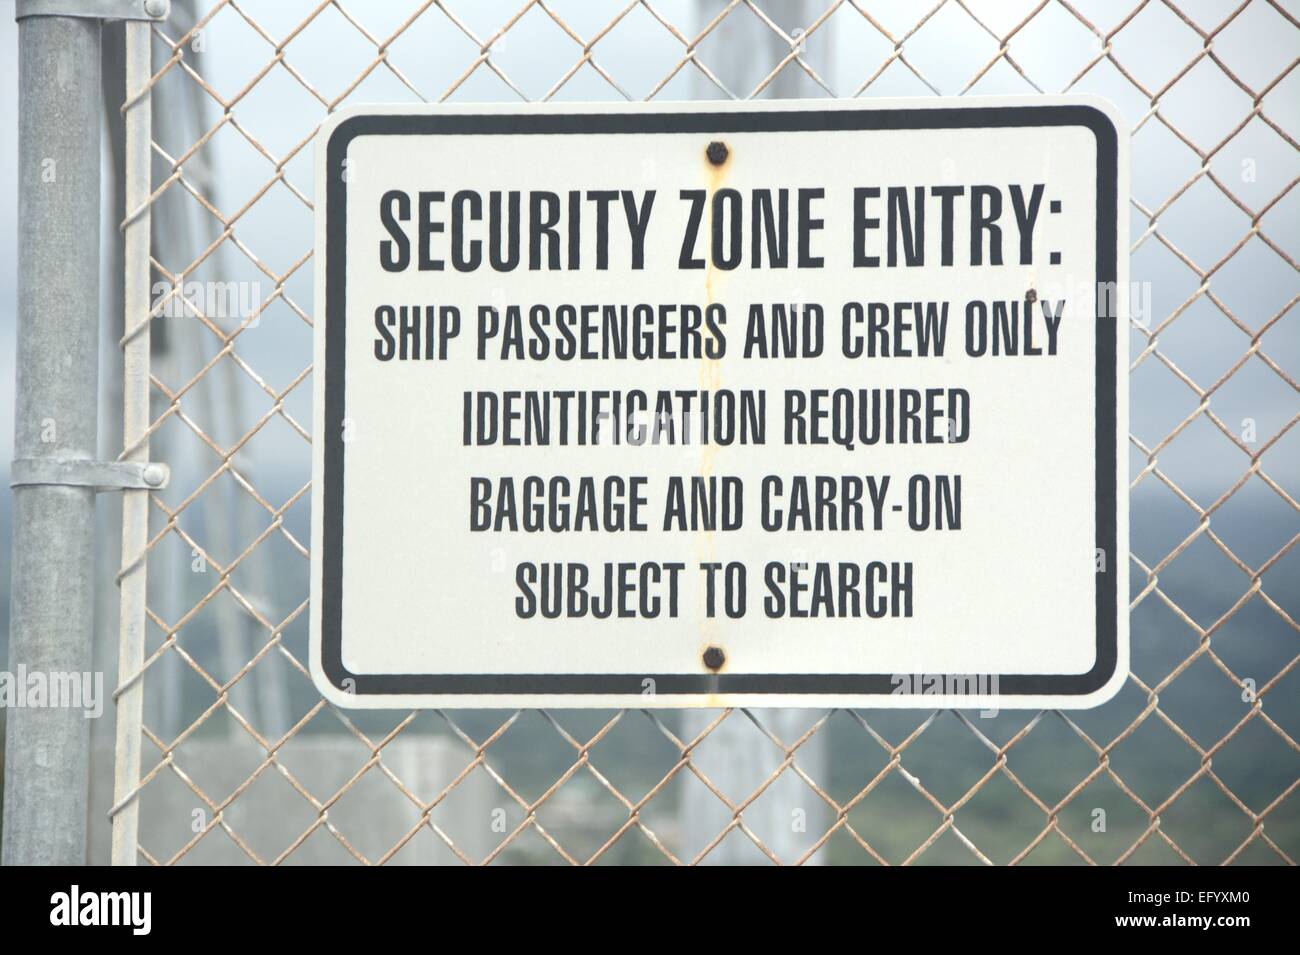 Security warning sign at port Stock Photo